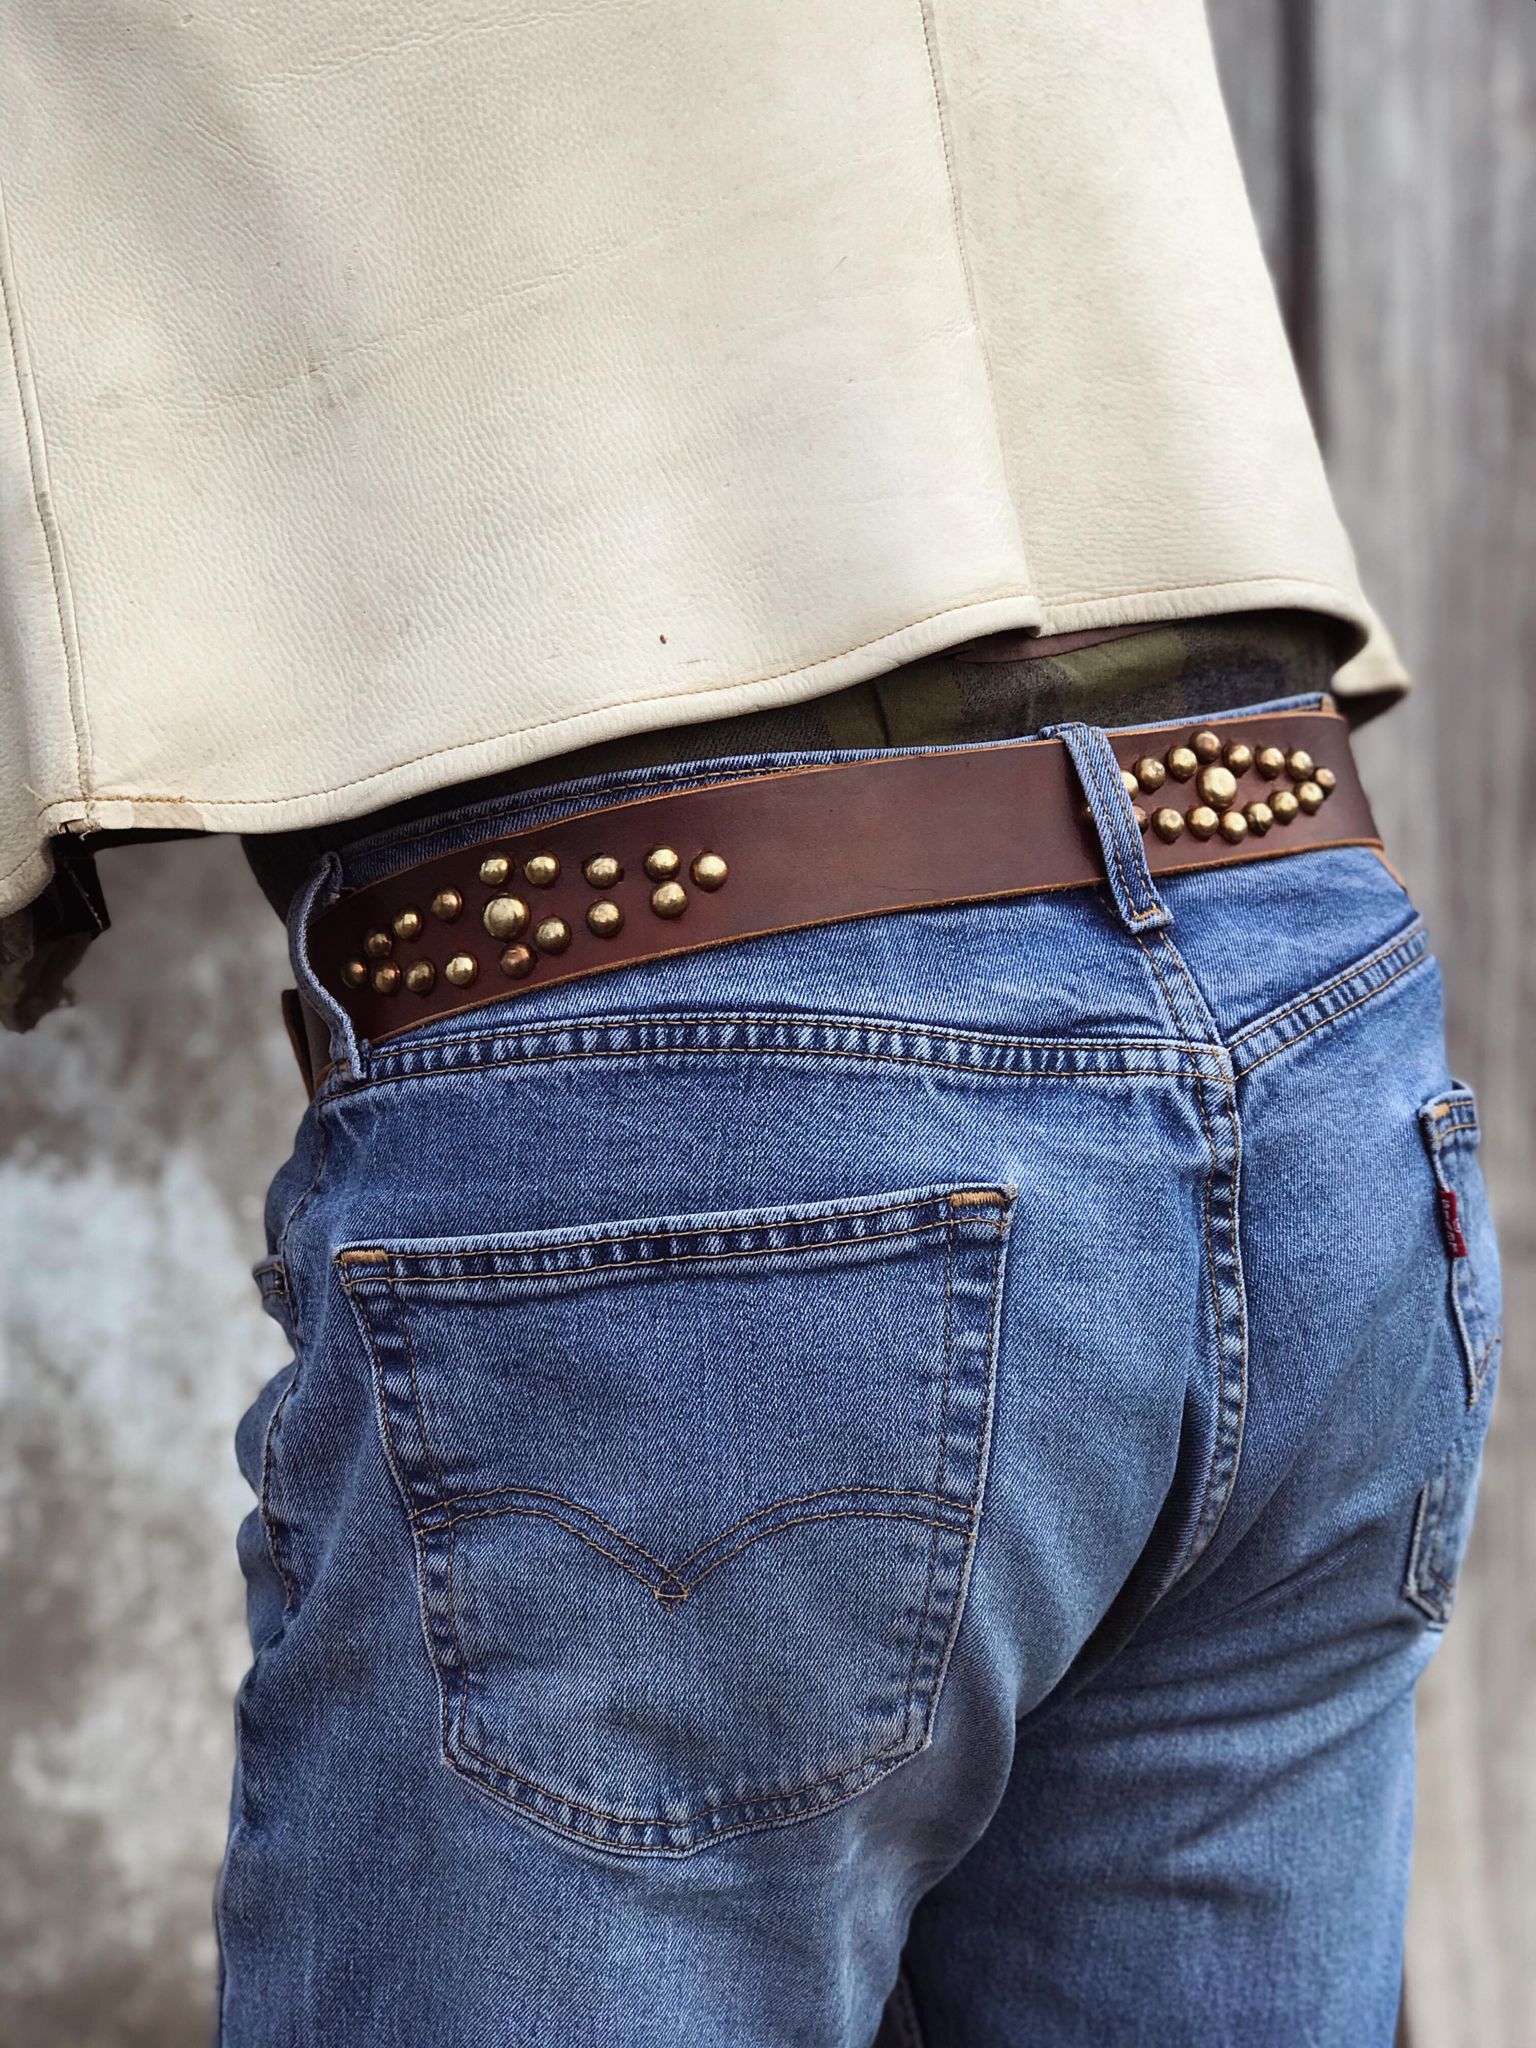 Vintage Style Belt and Buckle